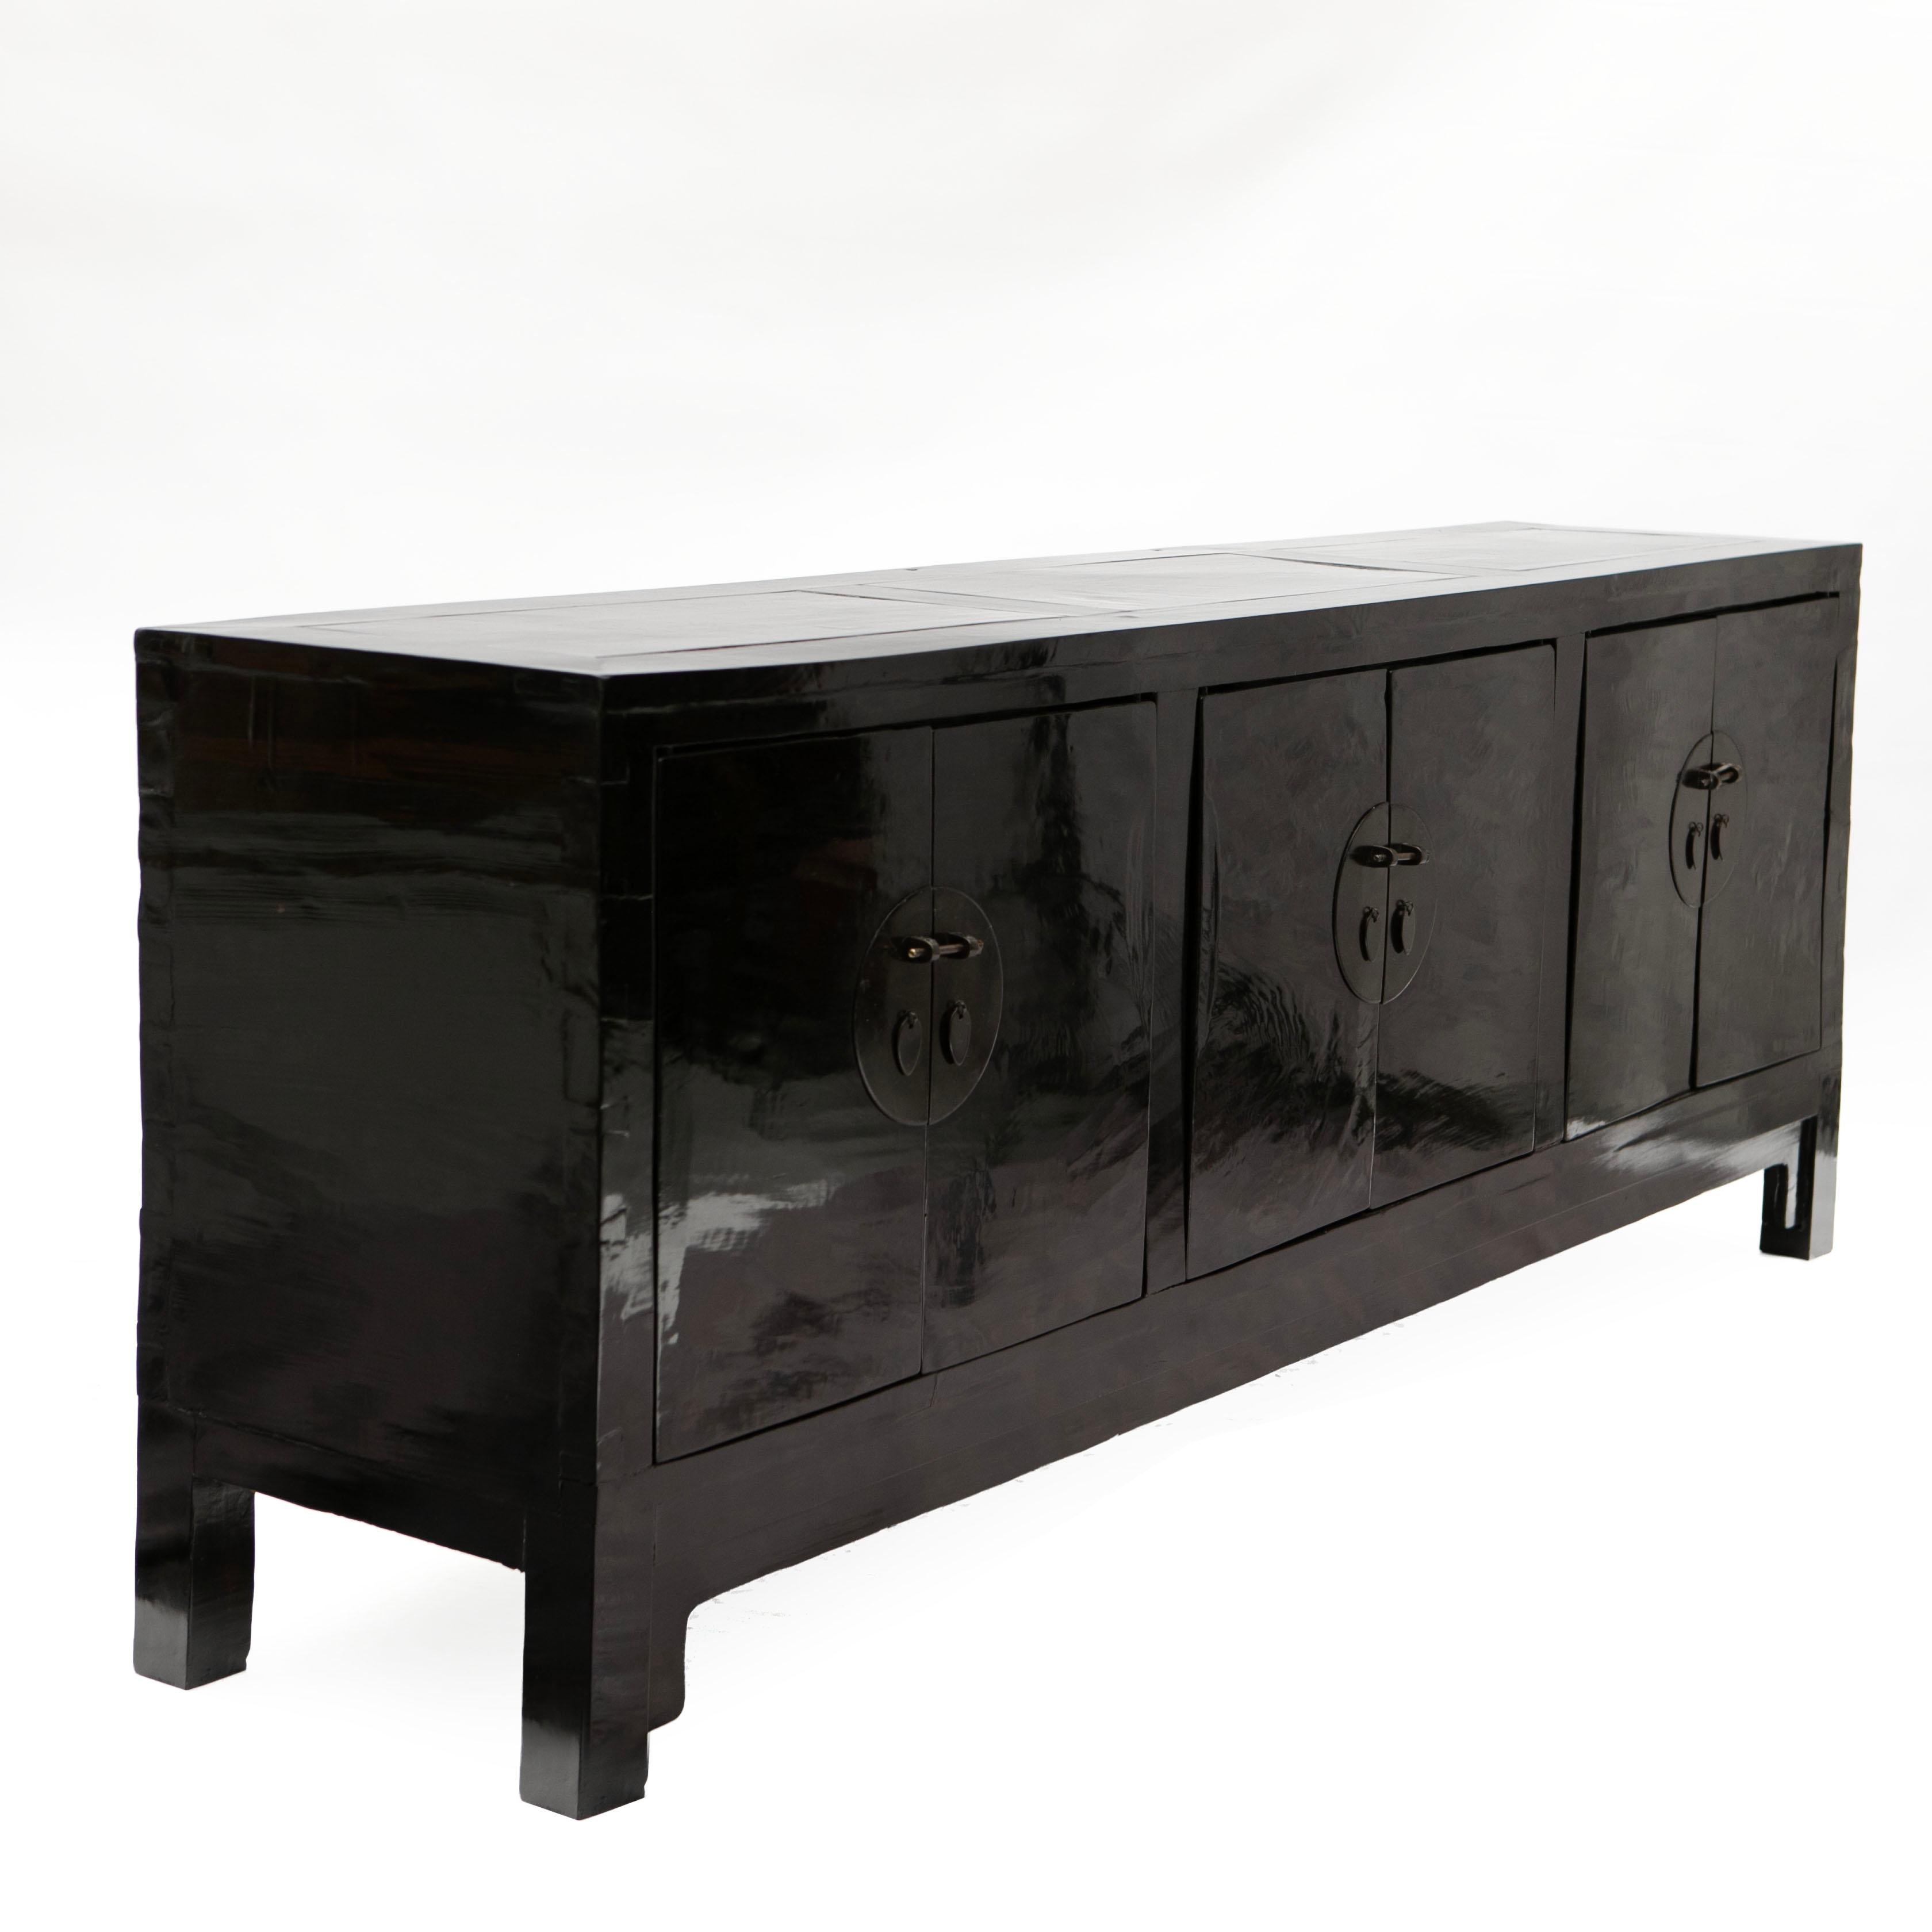 Qing Period Black Polished Sideboard, Jiangsu Province 1860-1880 In Good Condition For Sale In Kastrup, DK